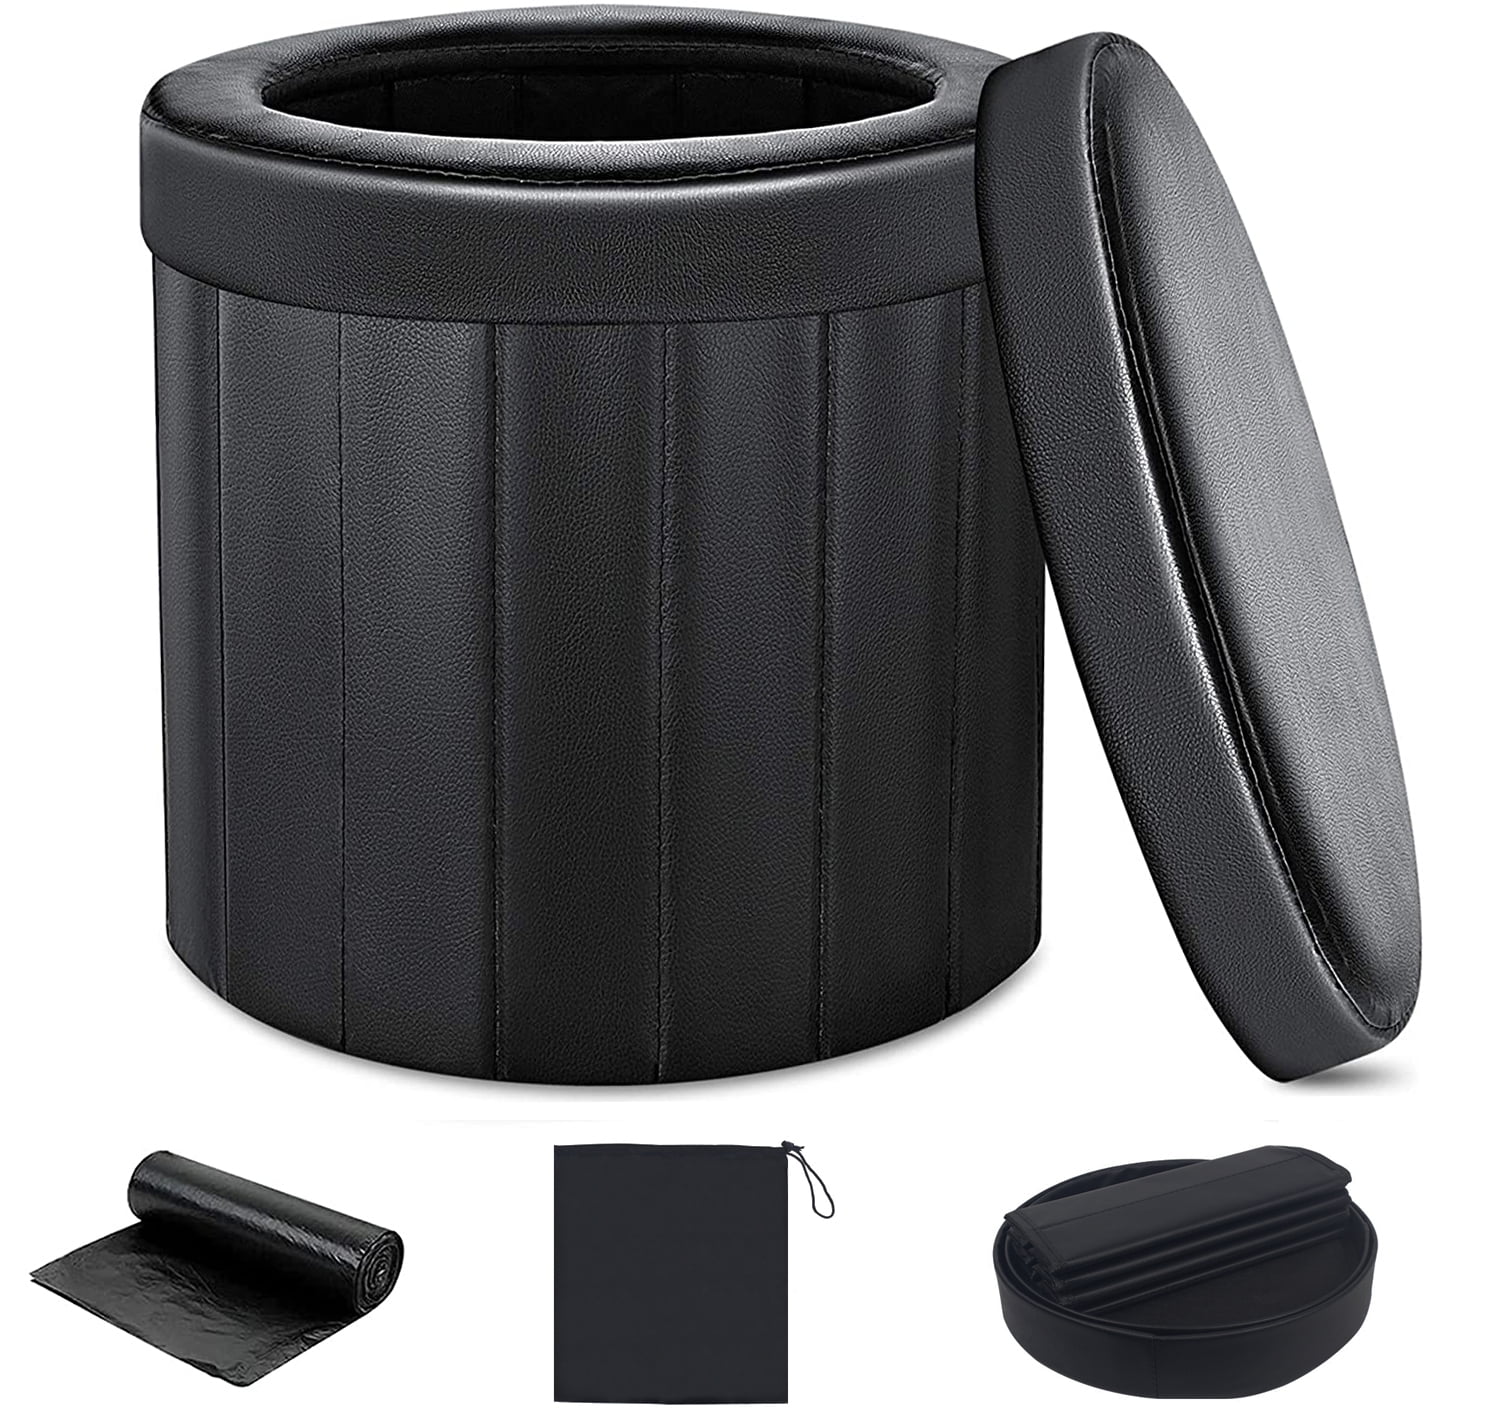 Kids Adults Car Folding Toilet Outdoor Camping Travel Portable Emergency black 